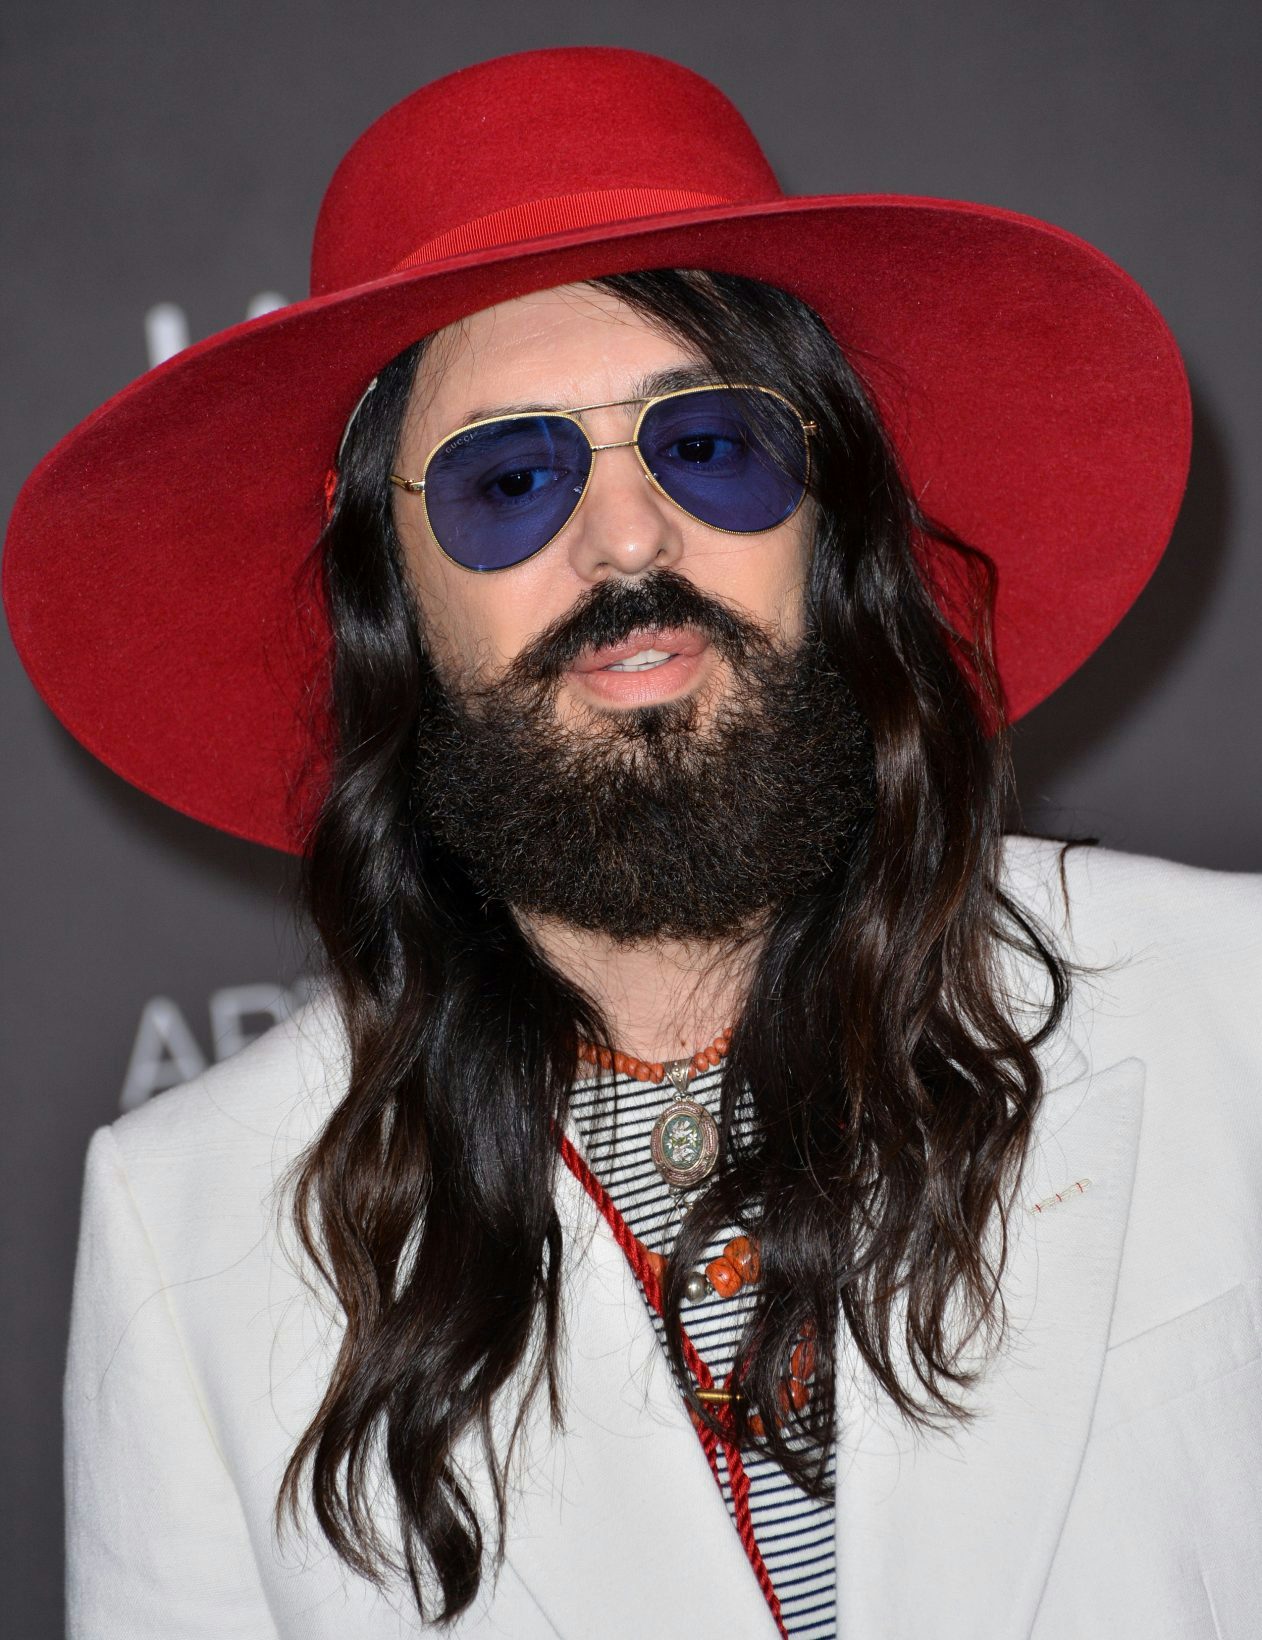 Rumors about Alessandro Michele’s return